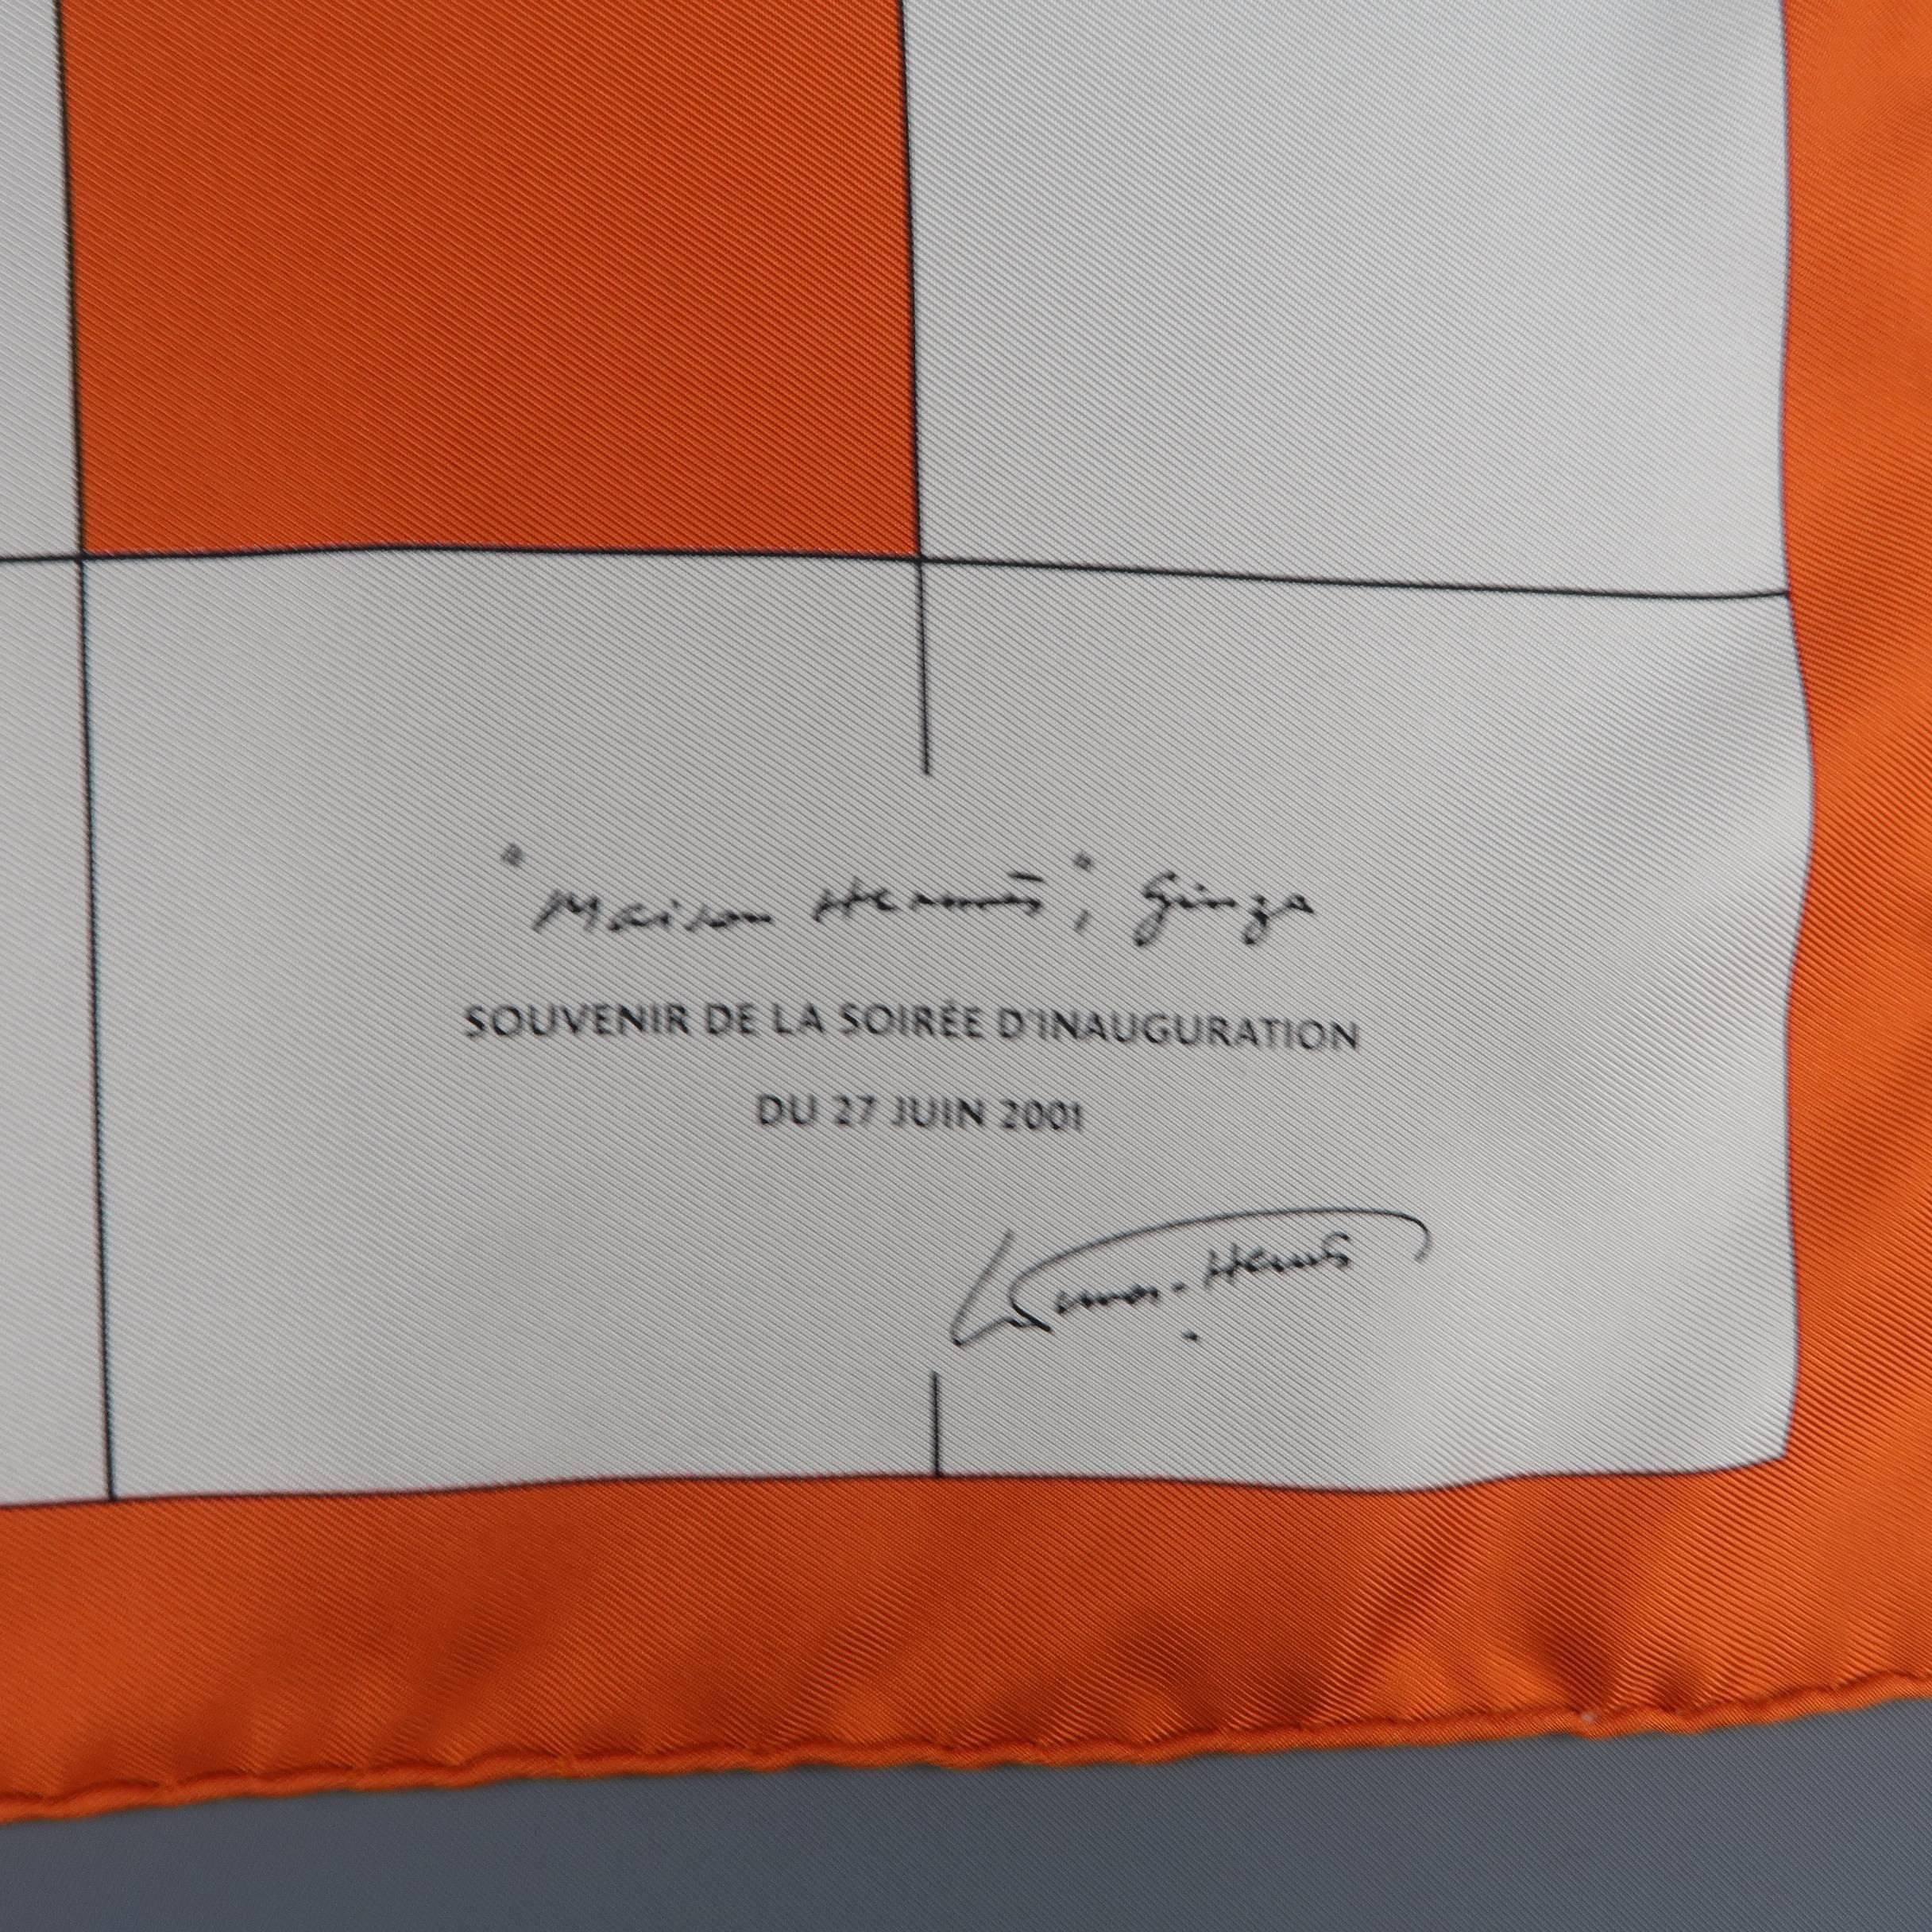 HERMES D'Inaguration 2001 pocket square comes in cream silk twill with grid patter, oversized orange H, and signature. Made in France.
 
Excellent Pre-Owned Condition.
 
16.5 x 16.5 in.

SKU: 84194